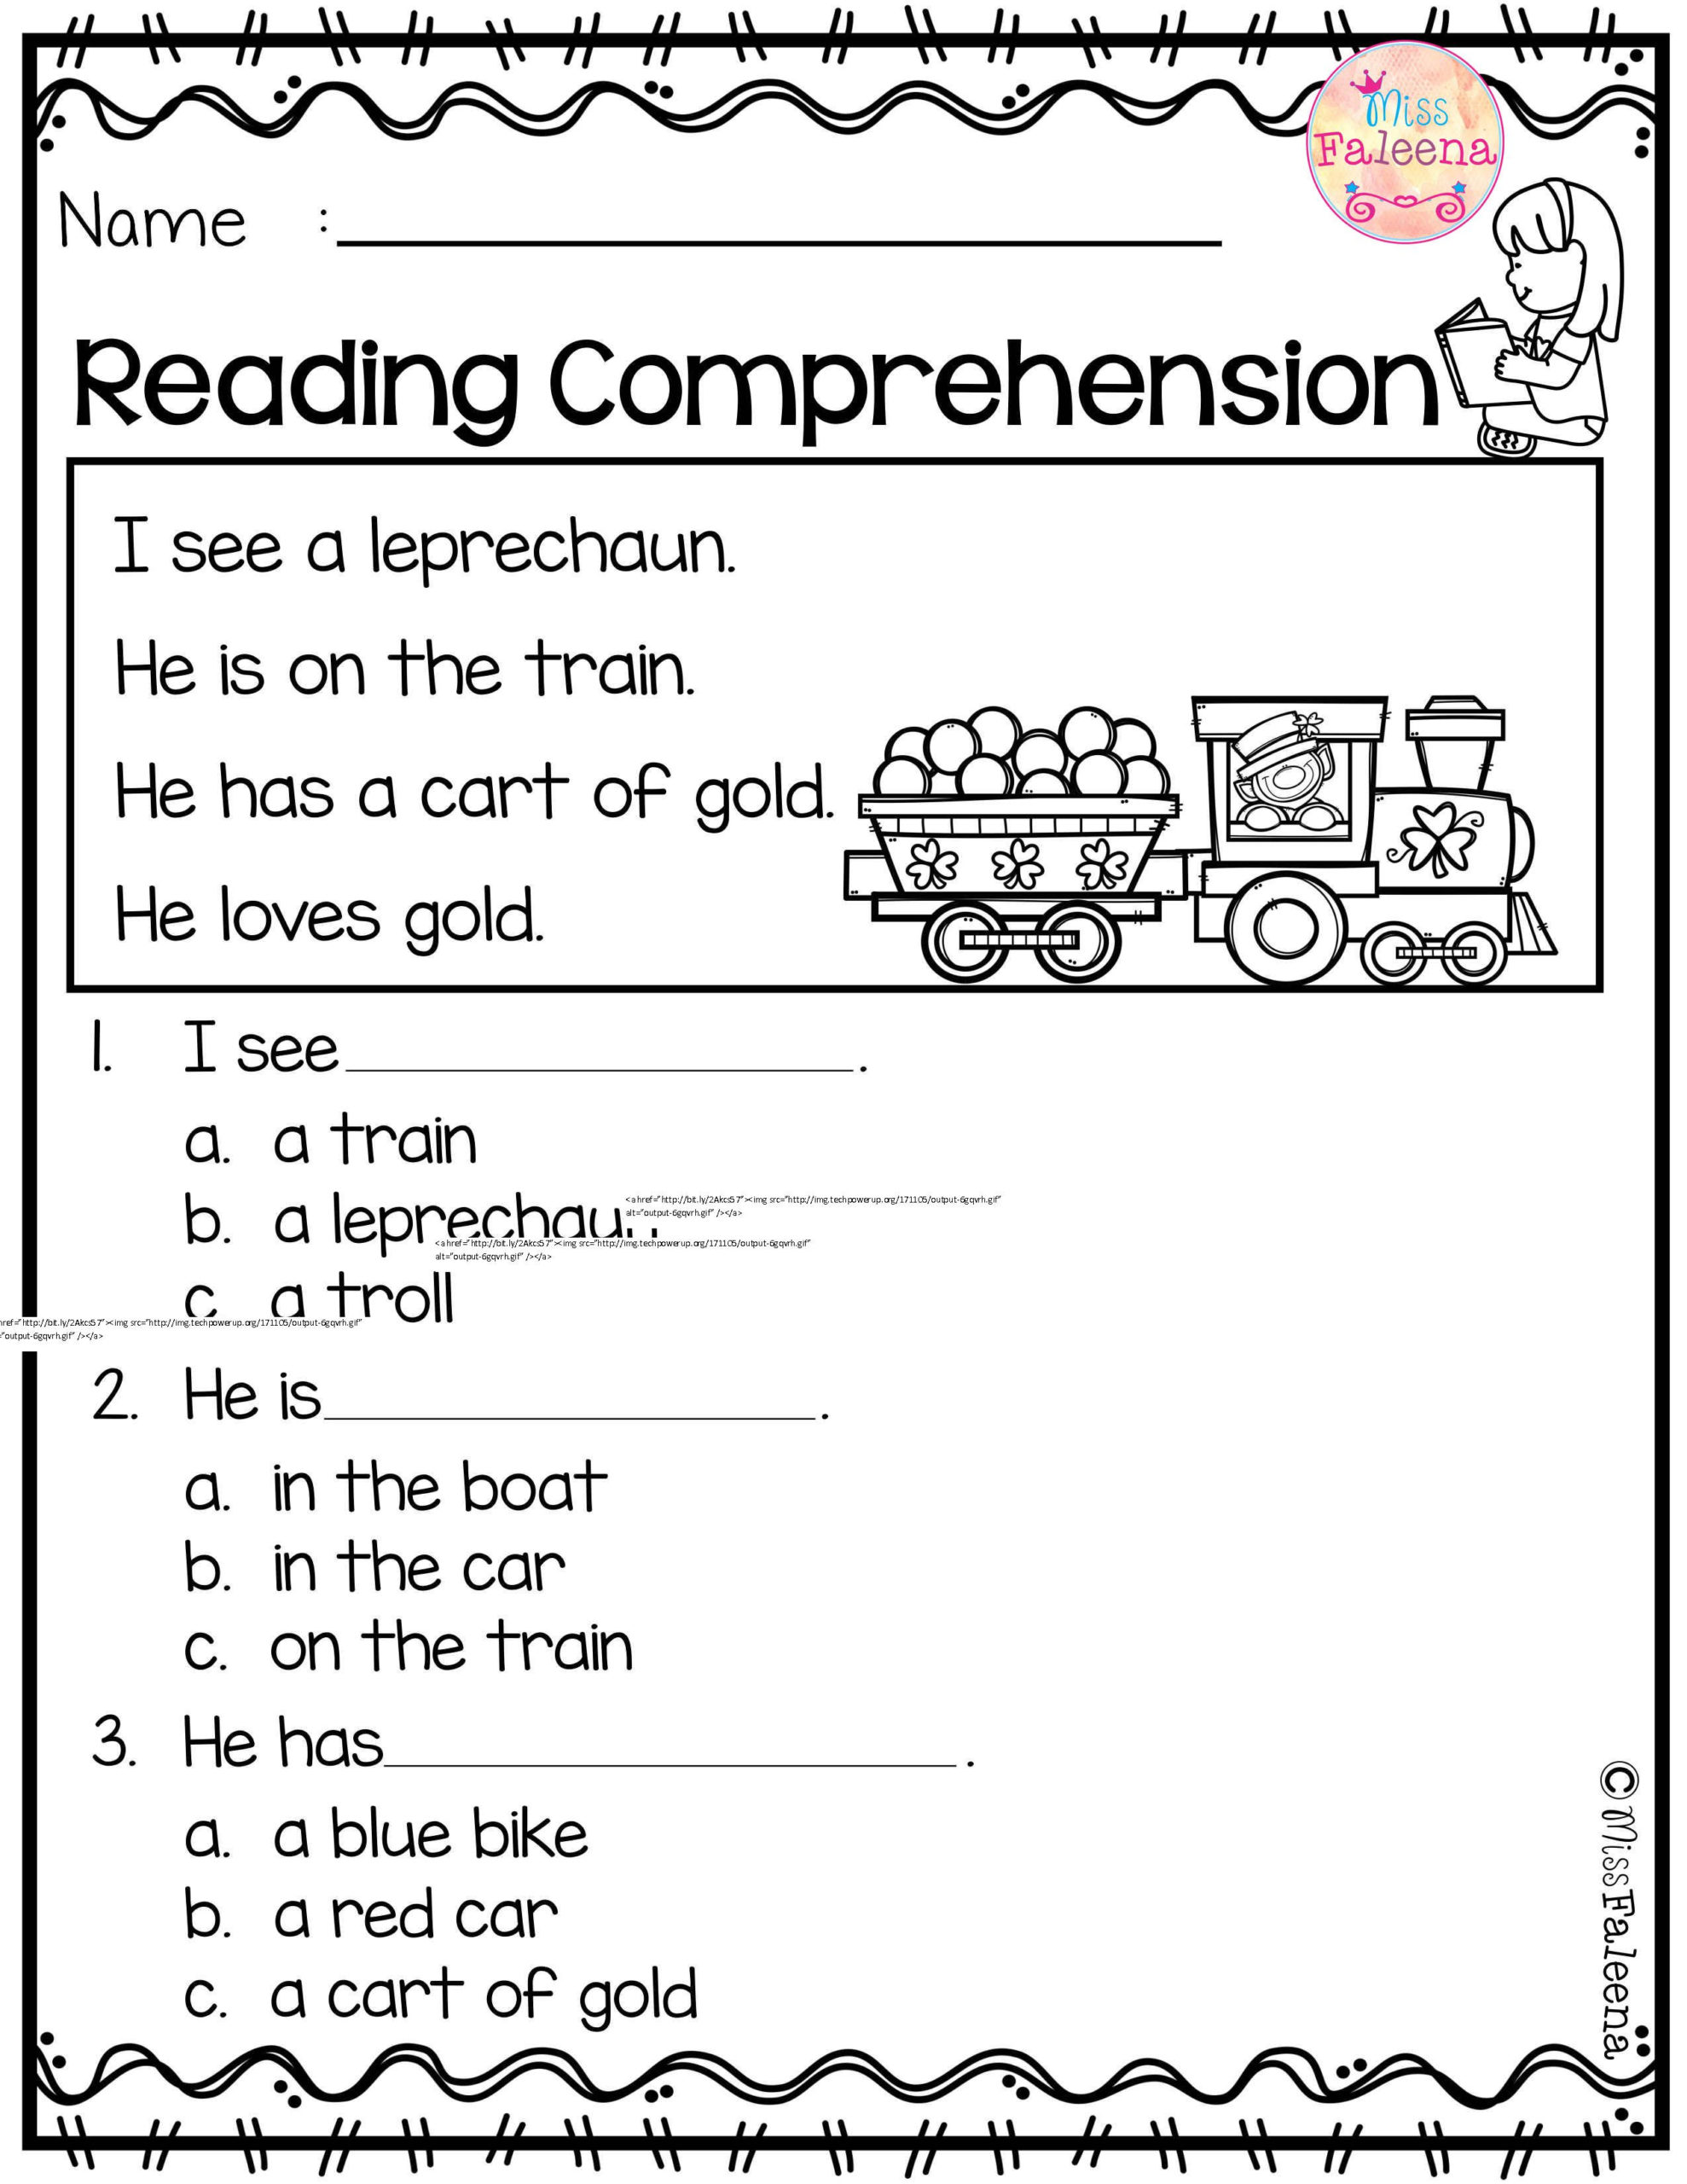 March Reading Comprehension | Reading Worksheets